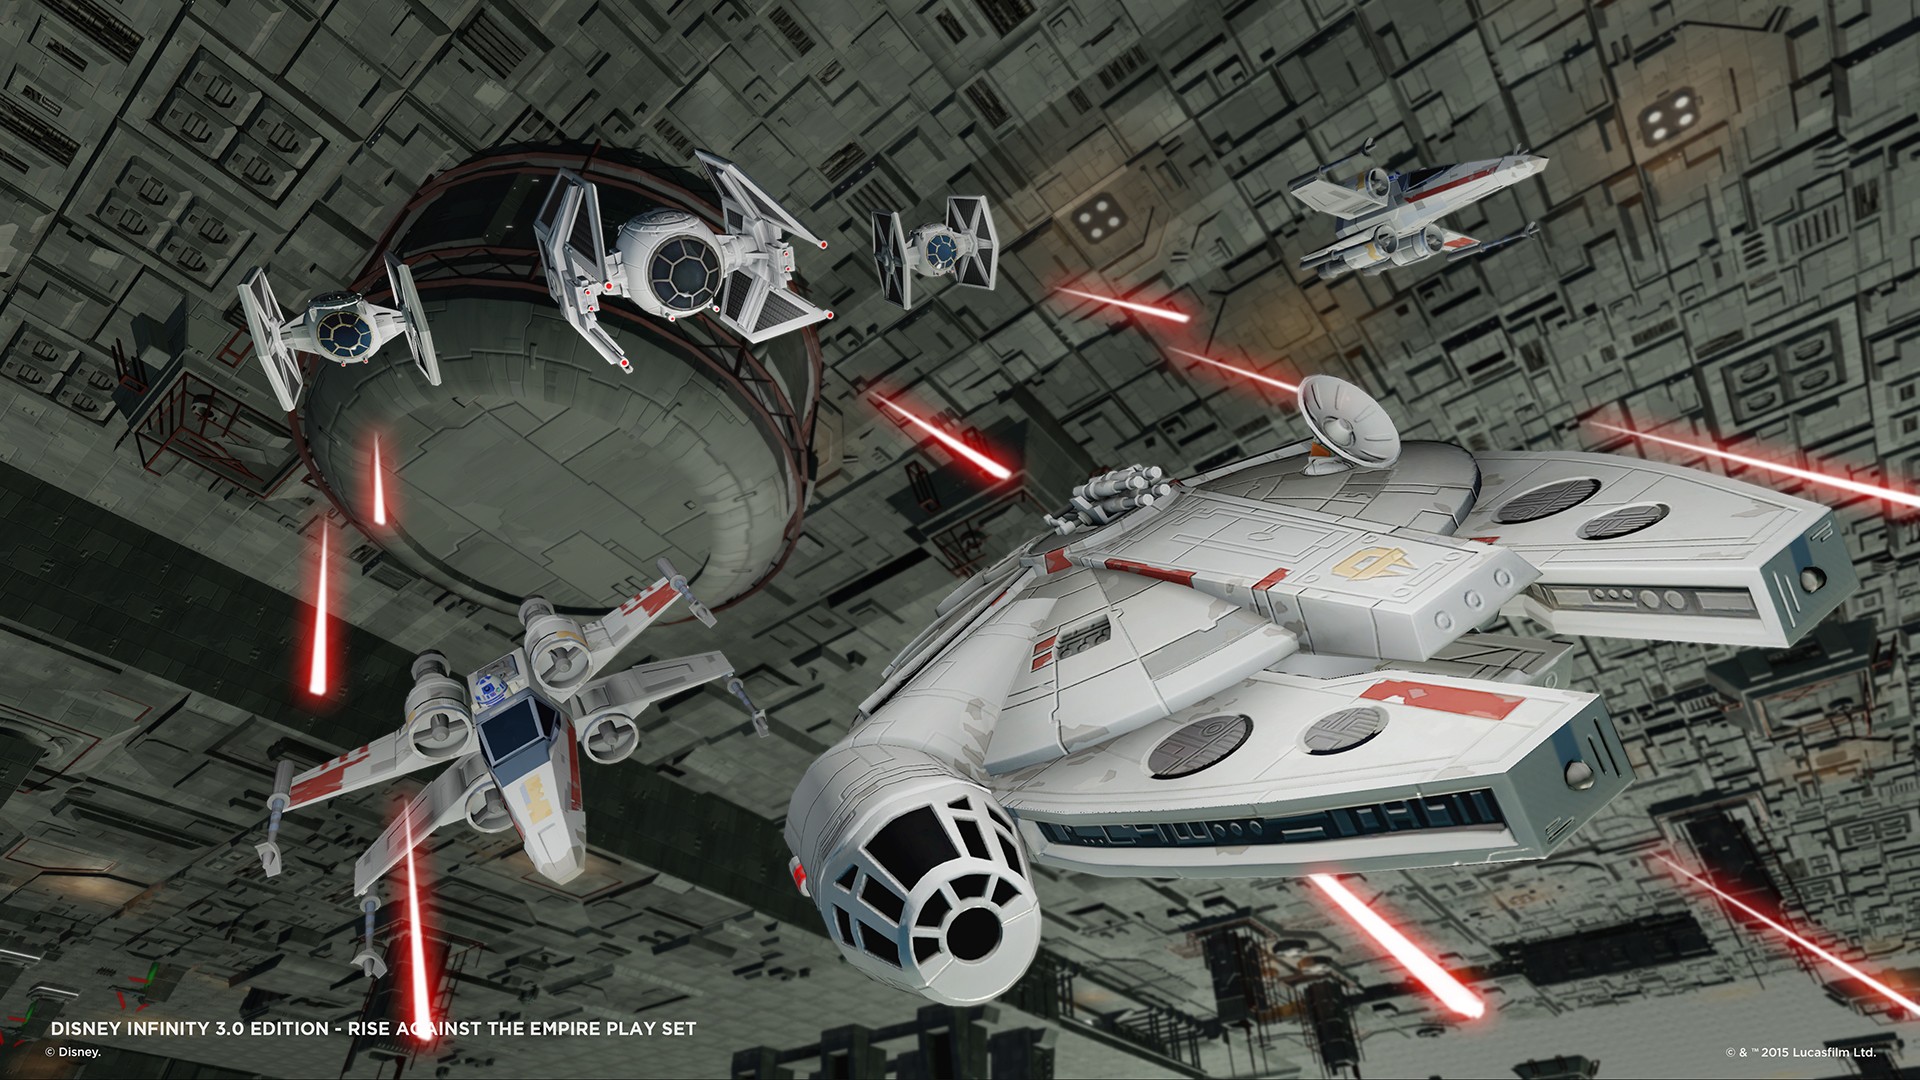 disney-infinity-3-0-star-wars-rise-against-the-empire-gets-details-new-images